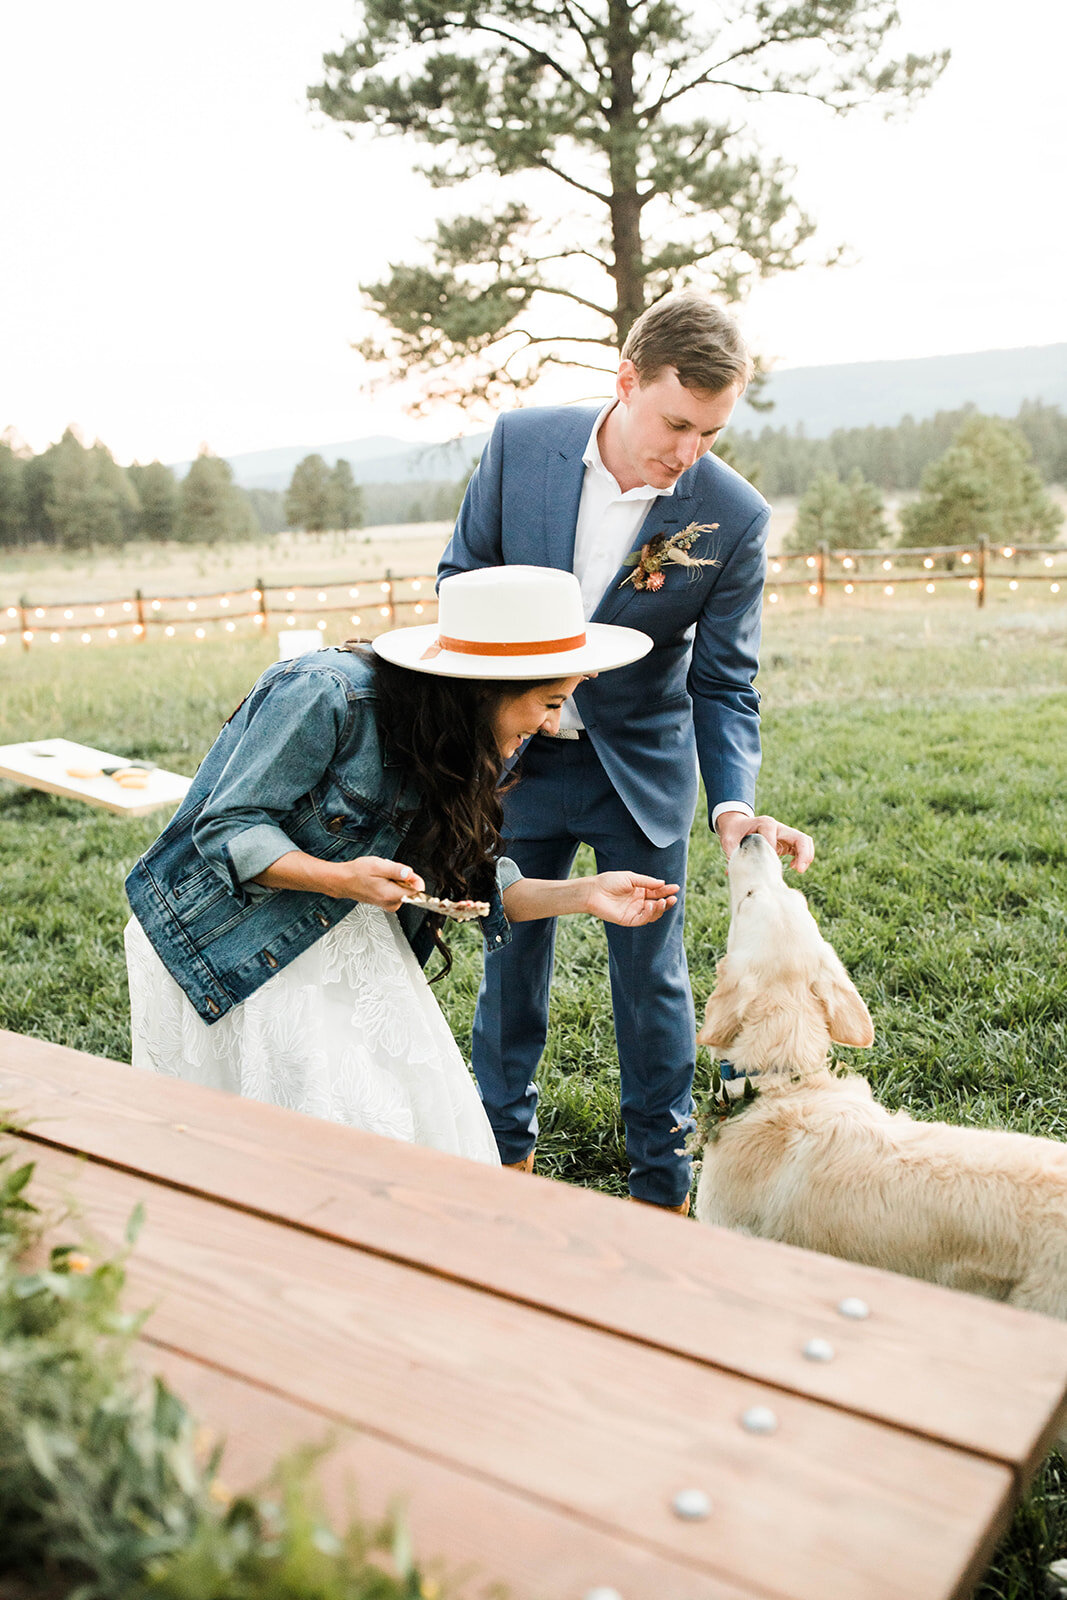 Newly weds cutting the cake at sunset surrounded by the Colorado Mountains